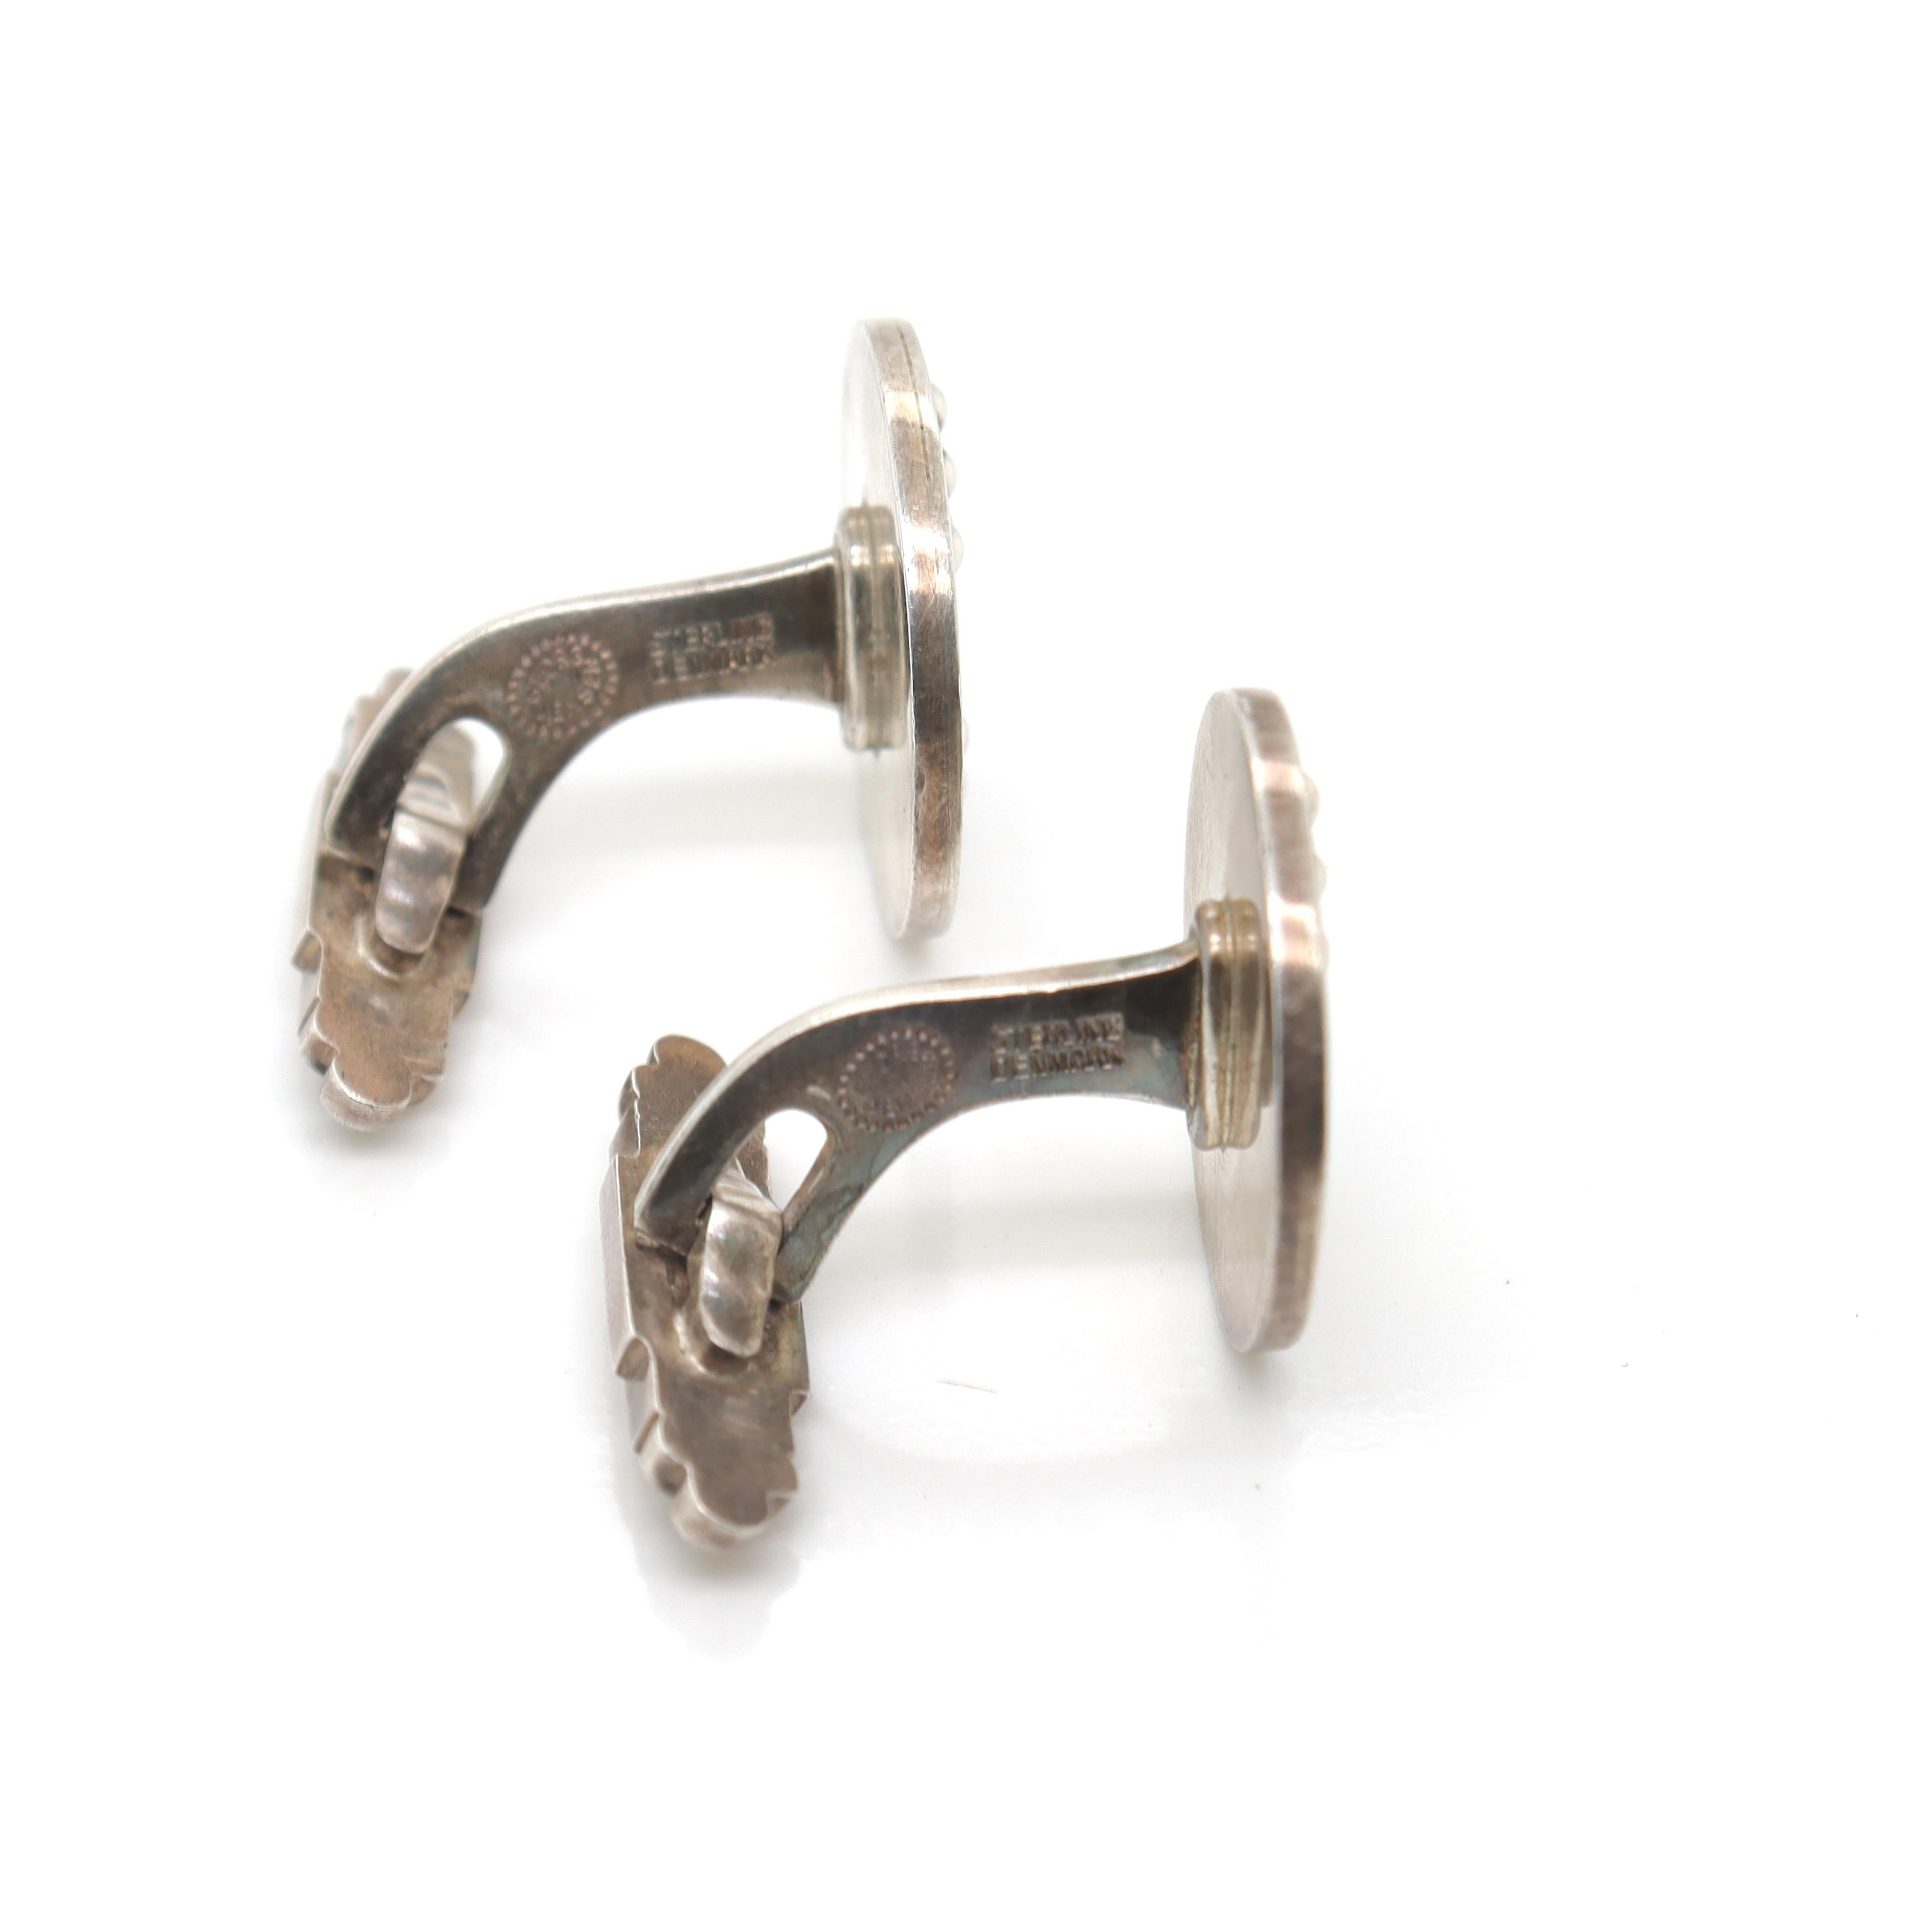 Pair of Georg Jensen Sterling Silver Cufflinks No. 57 For Sale 4